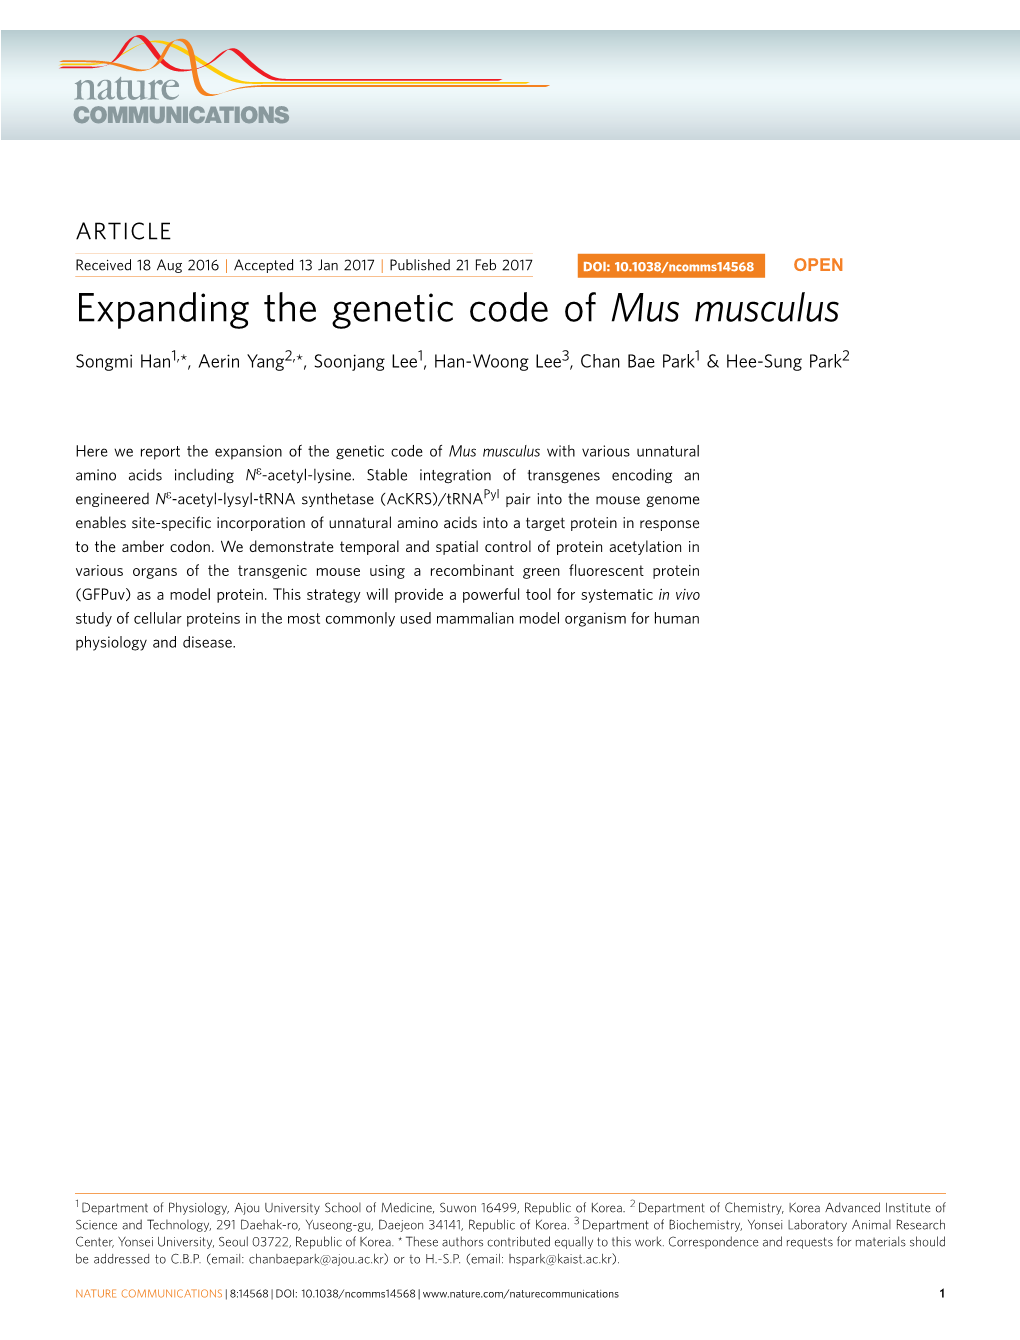 Expanding the Genetic Code of Mus Musculus